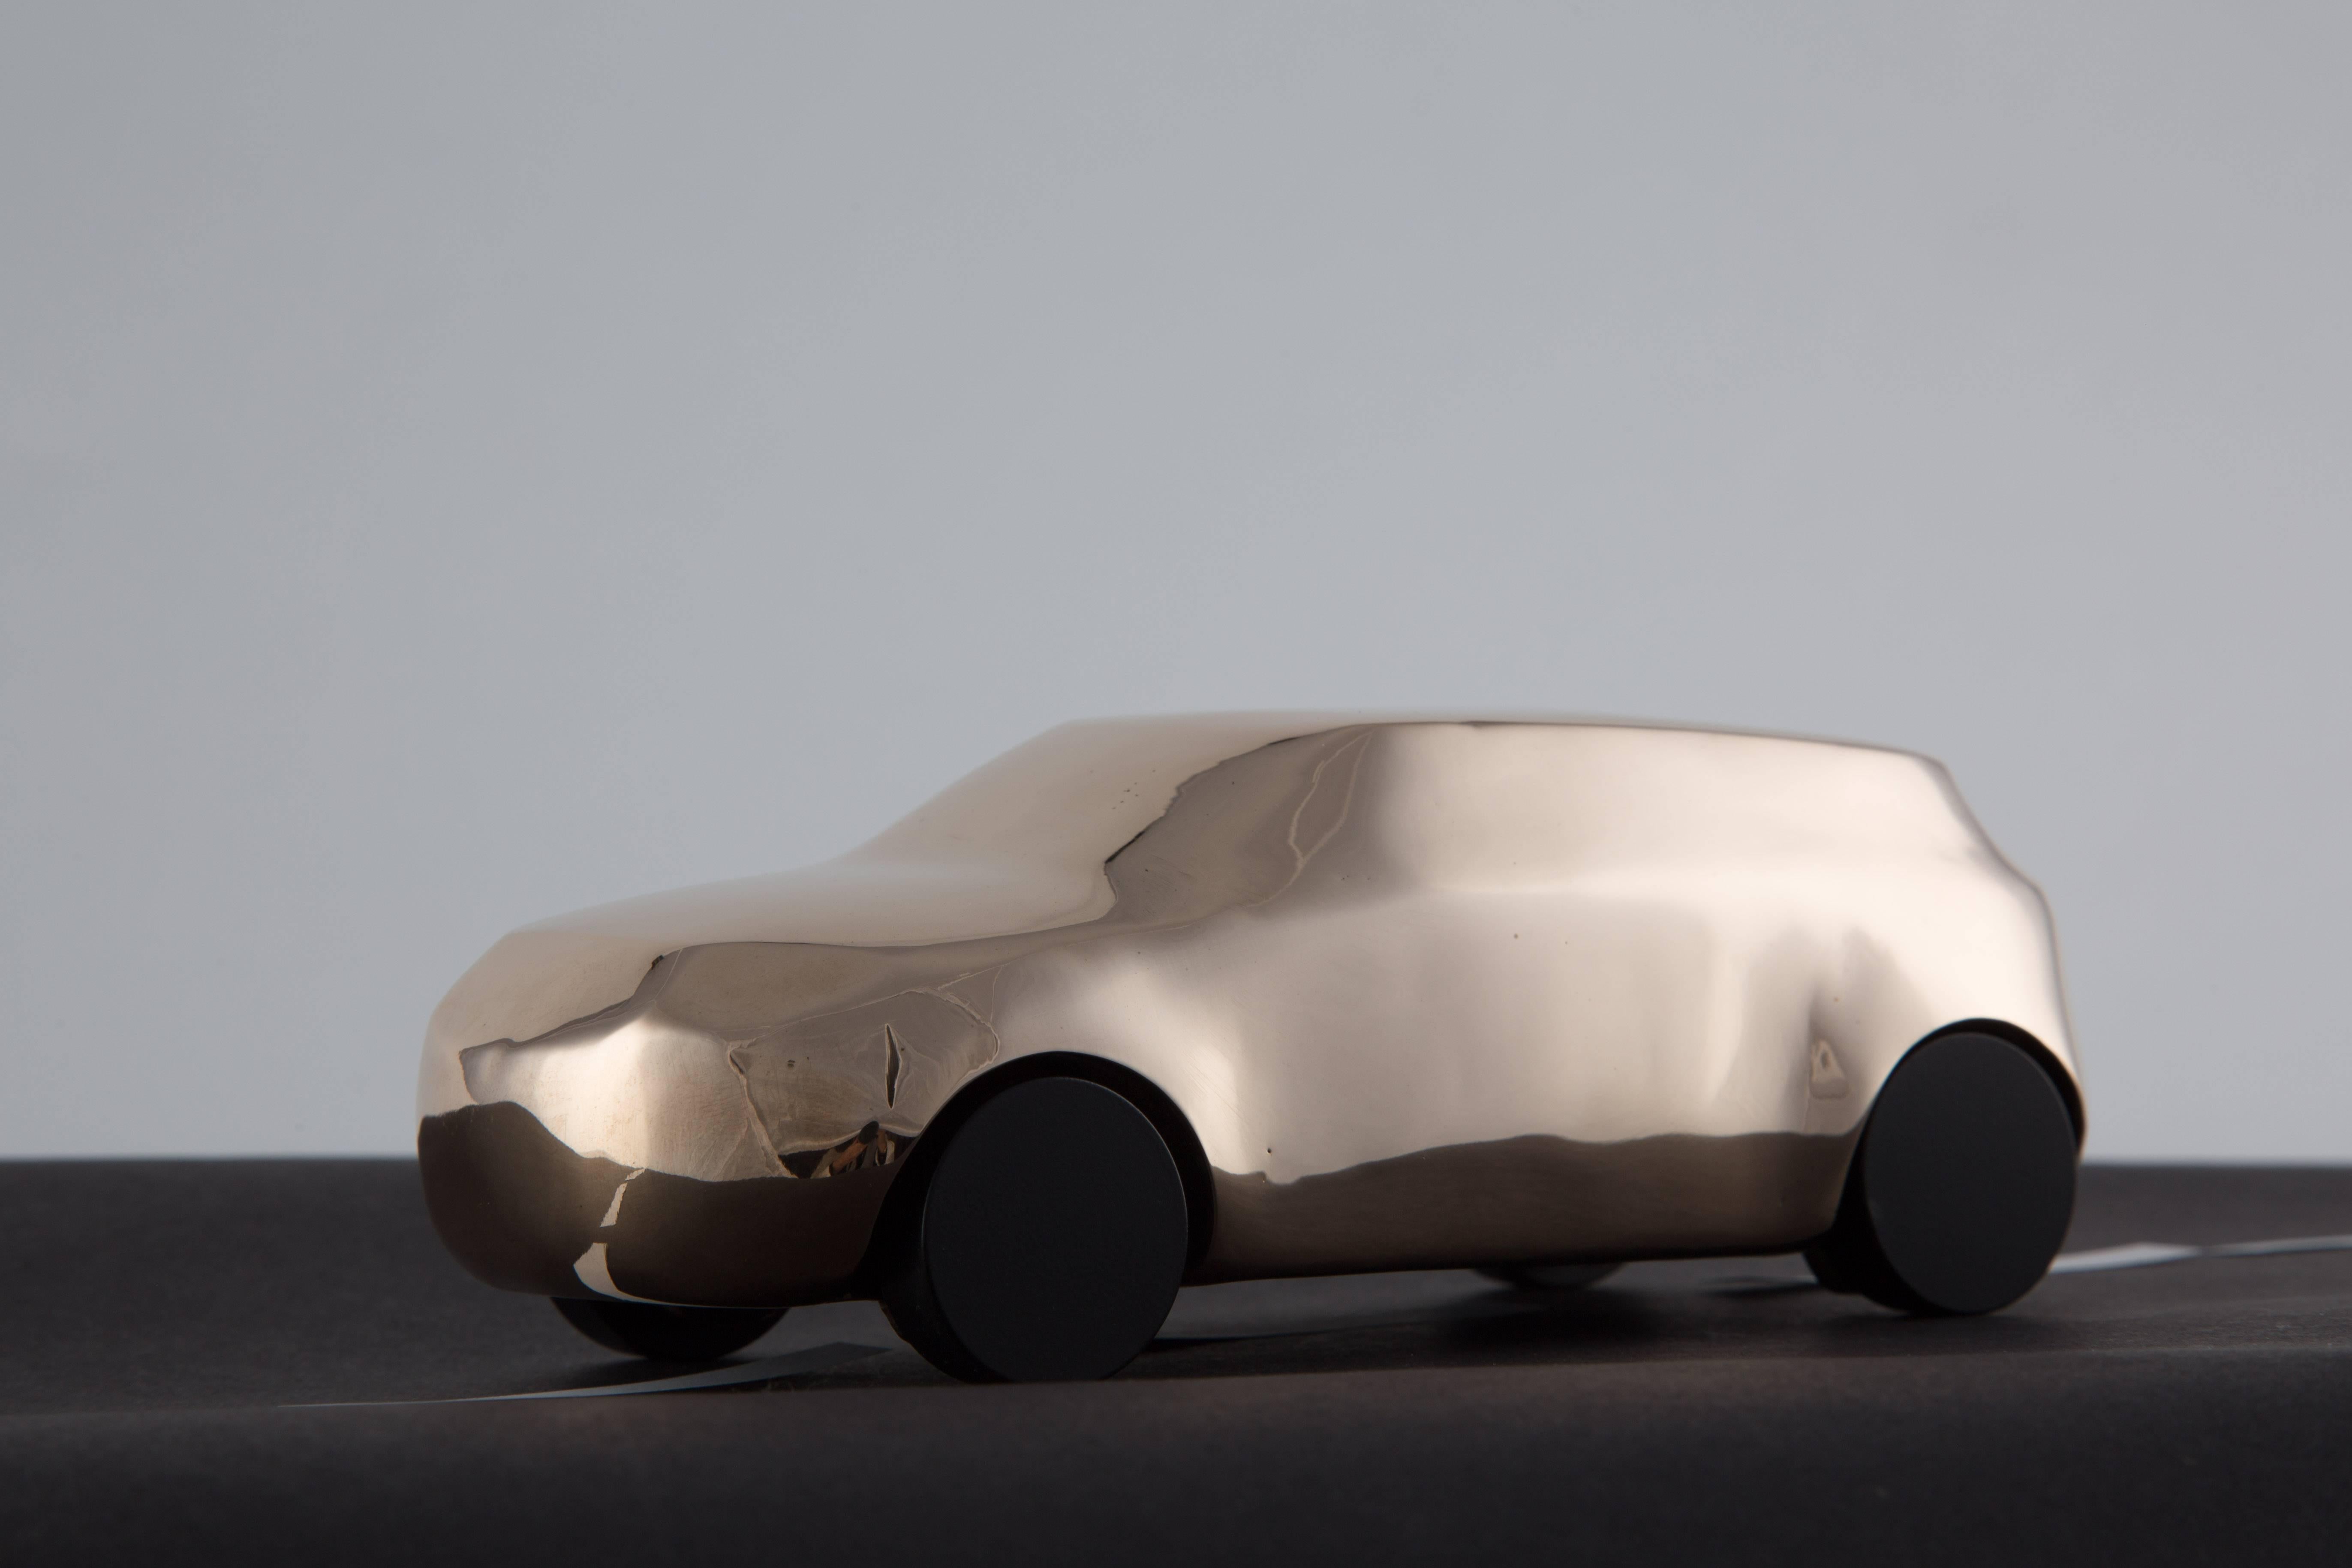 STUDIO JOB for LAND ROVER in bronze limited edition Range Rover Evoque - Gold Figurative Sculpture by Studio Job (Job Smeets & Nynke Tynagel)